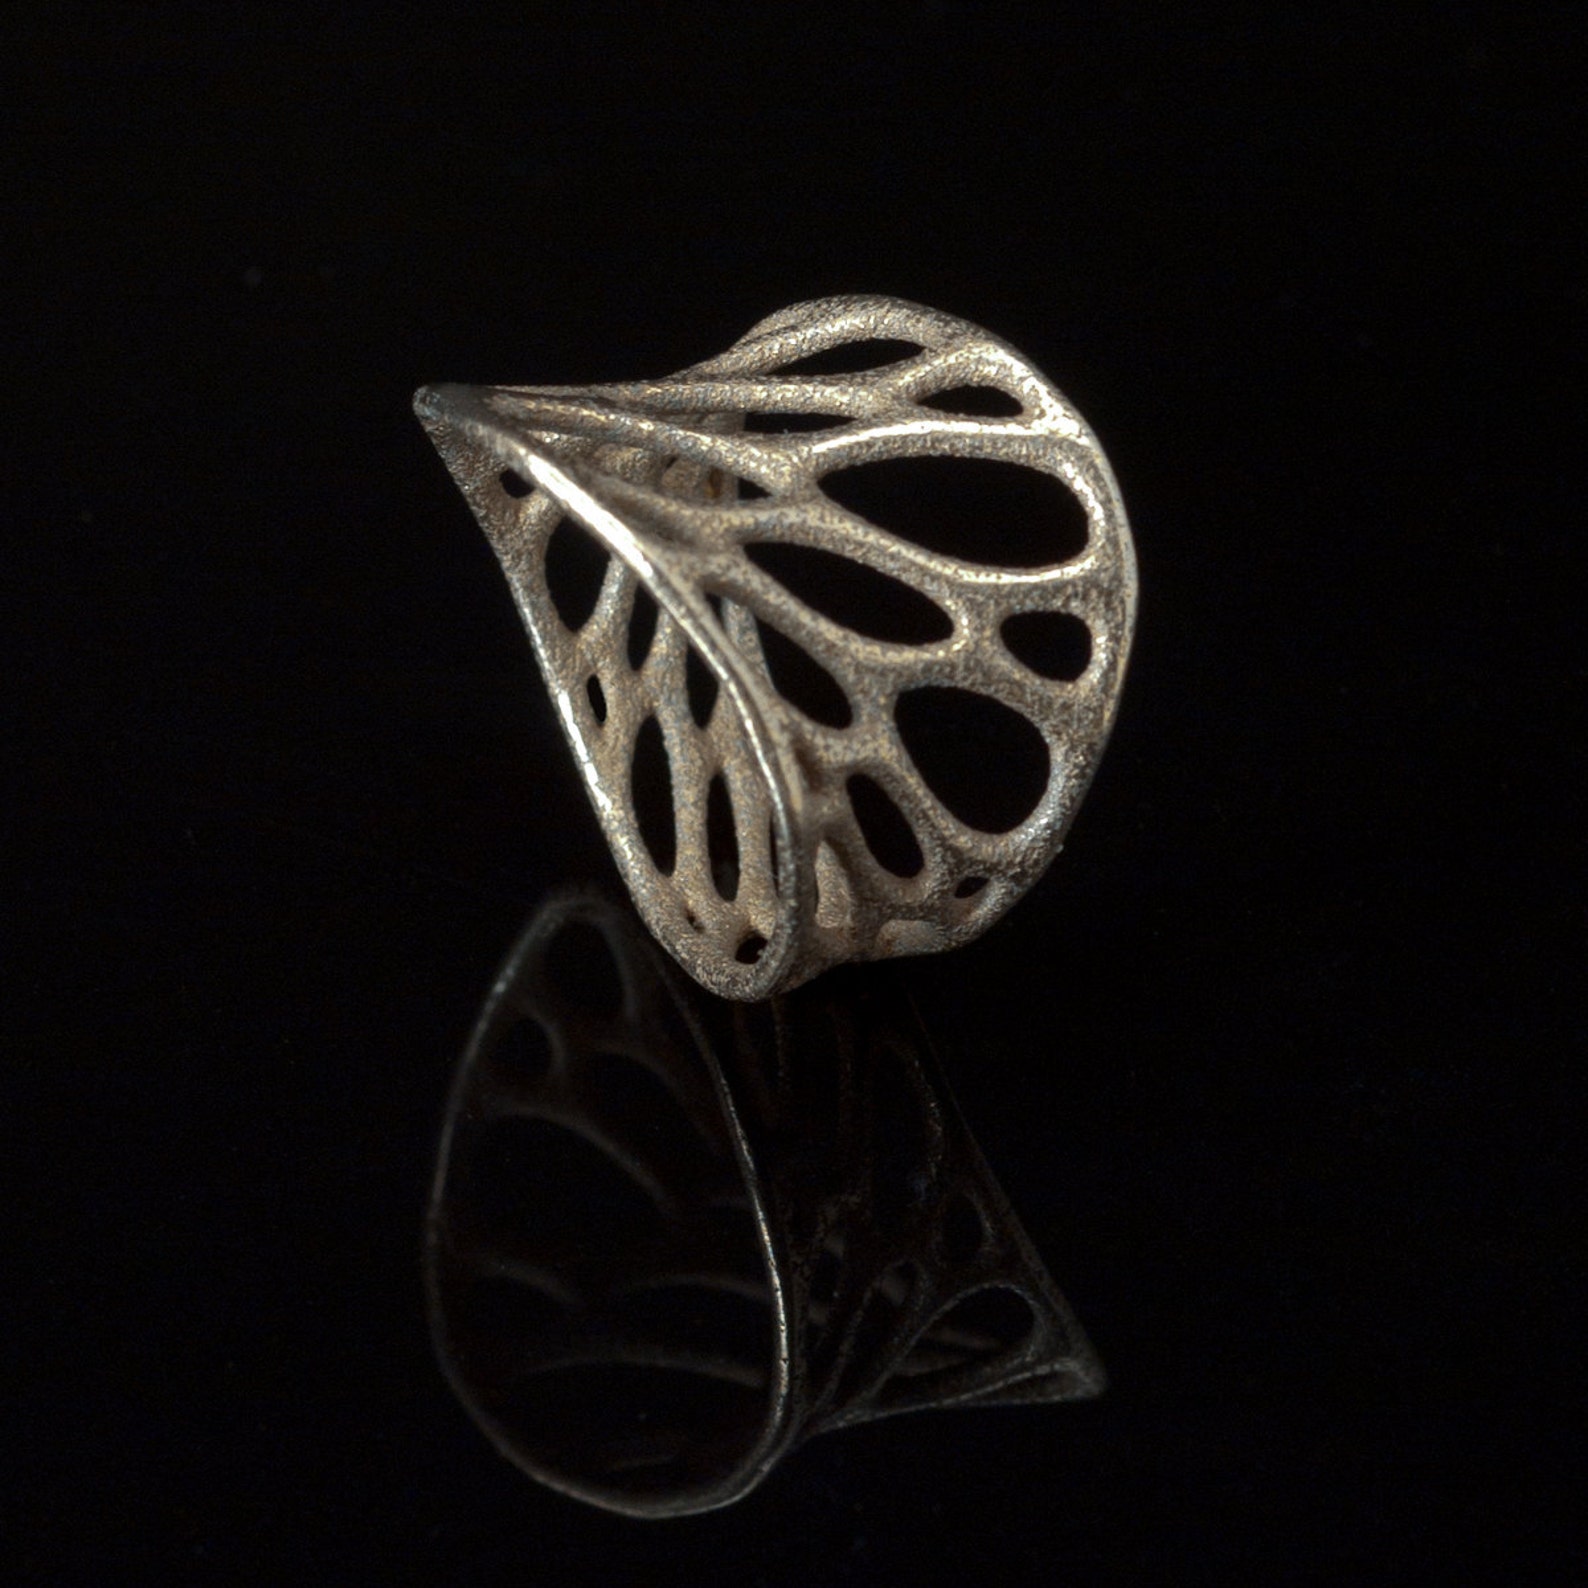 1-layer Twist Ring 3D Printed Stainless Steel - Etsy